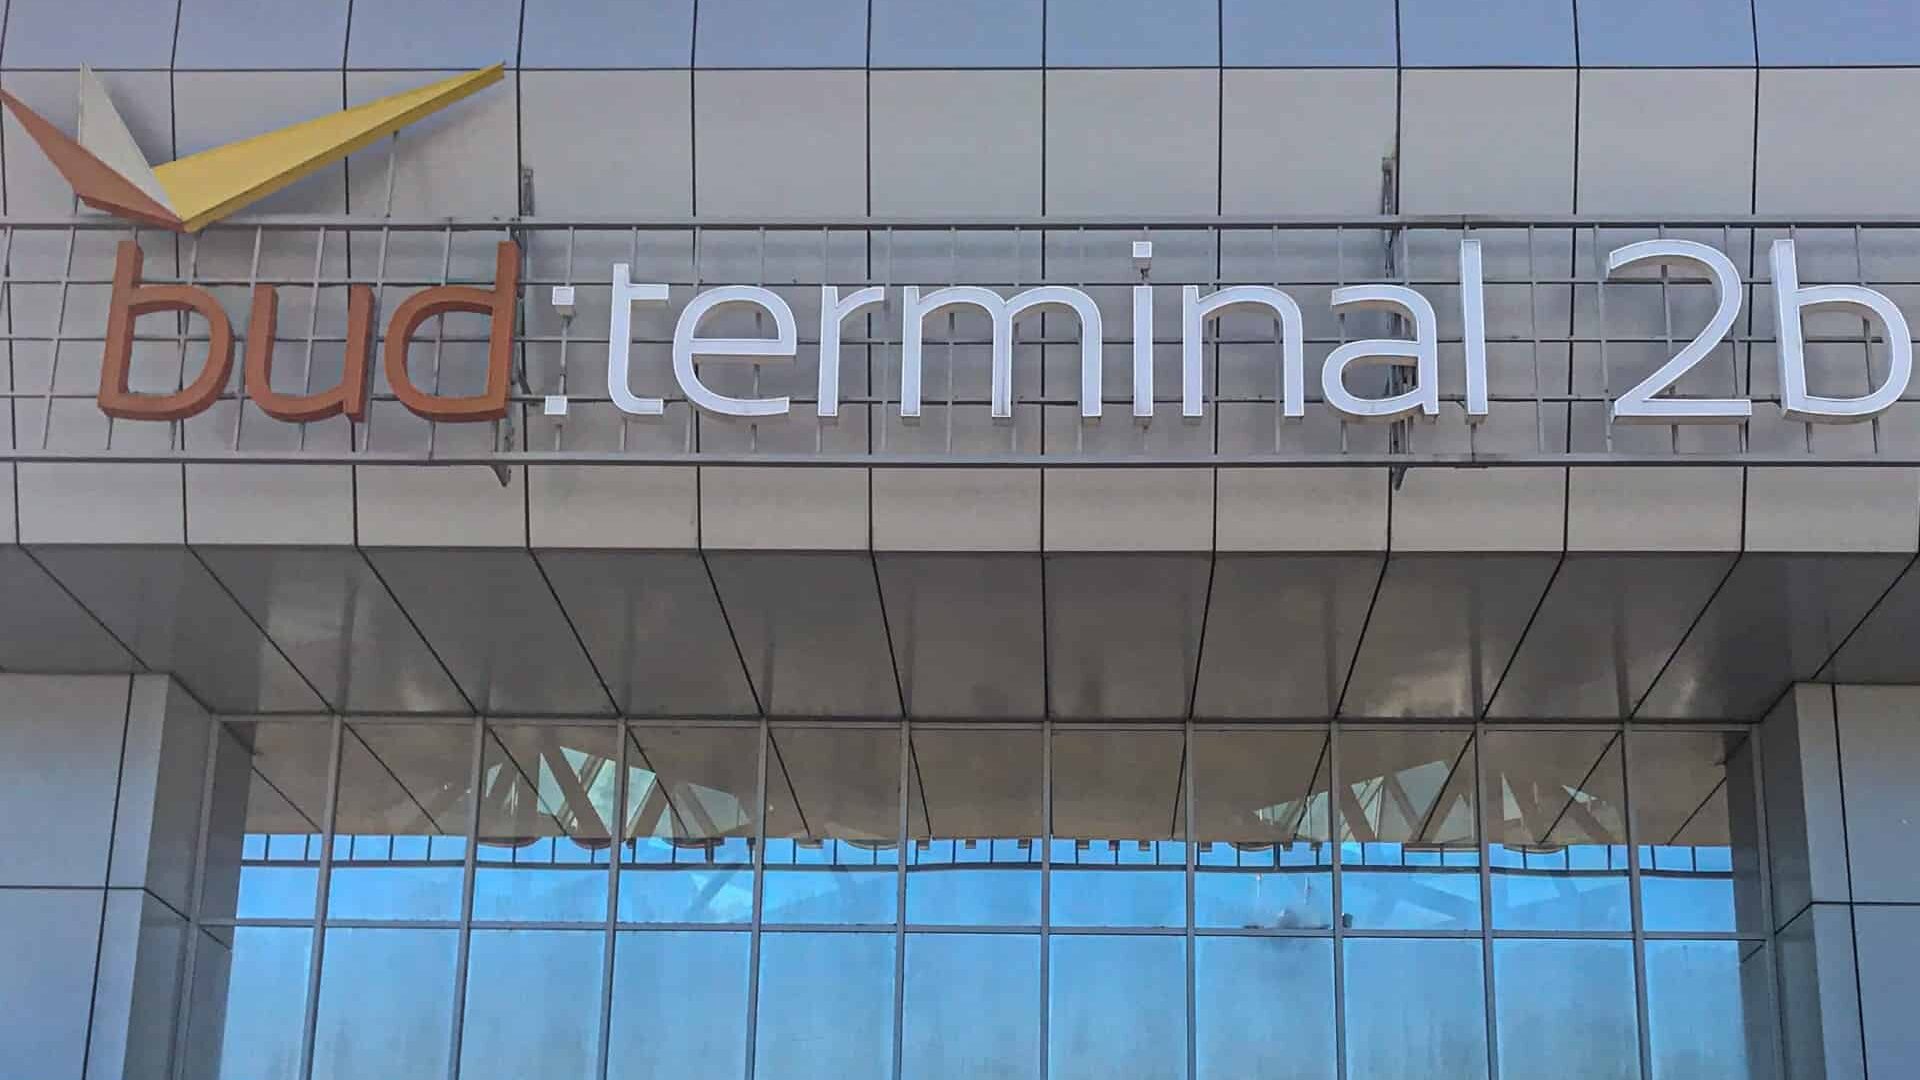 Exterior shot of the terminal 2b at Liszt Ferenc Airport, Budapest